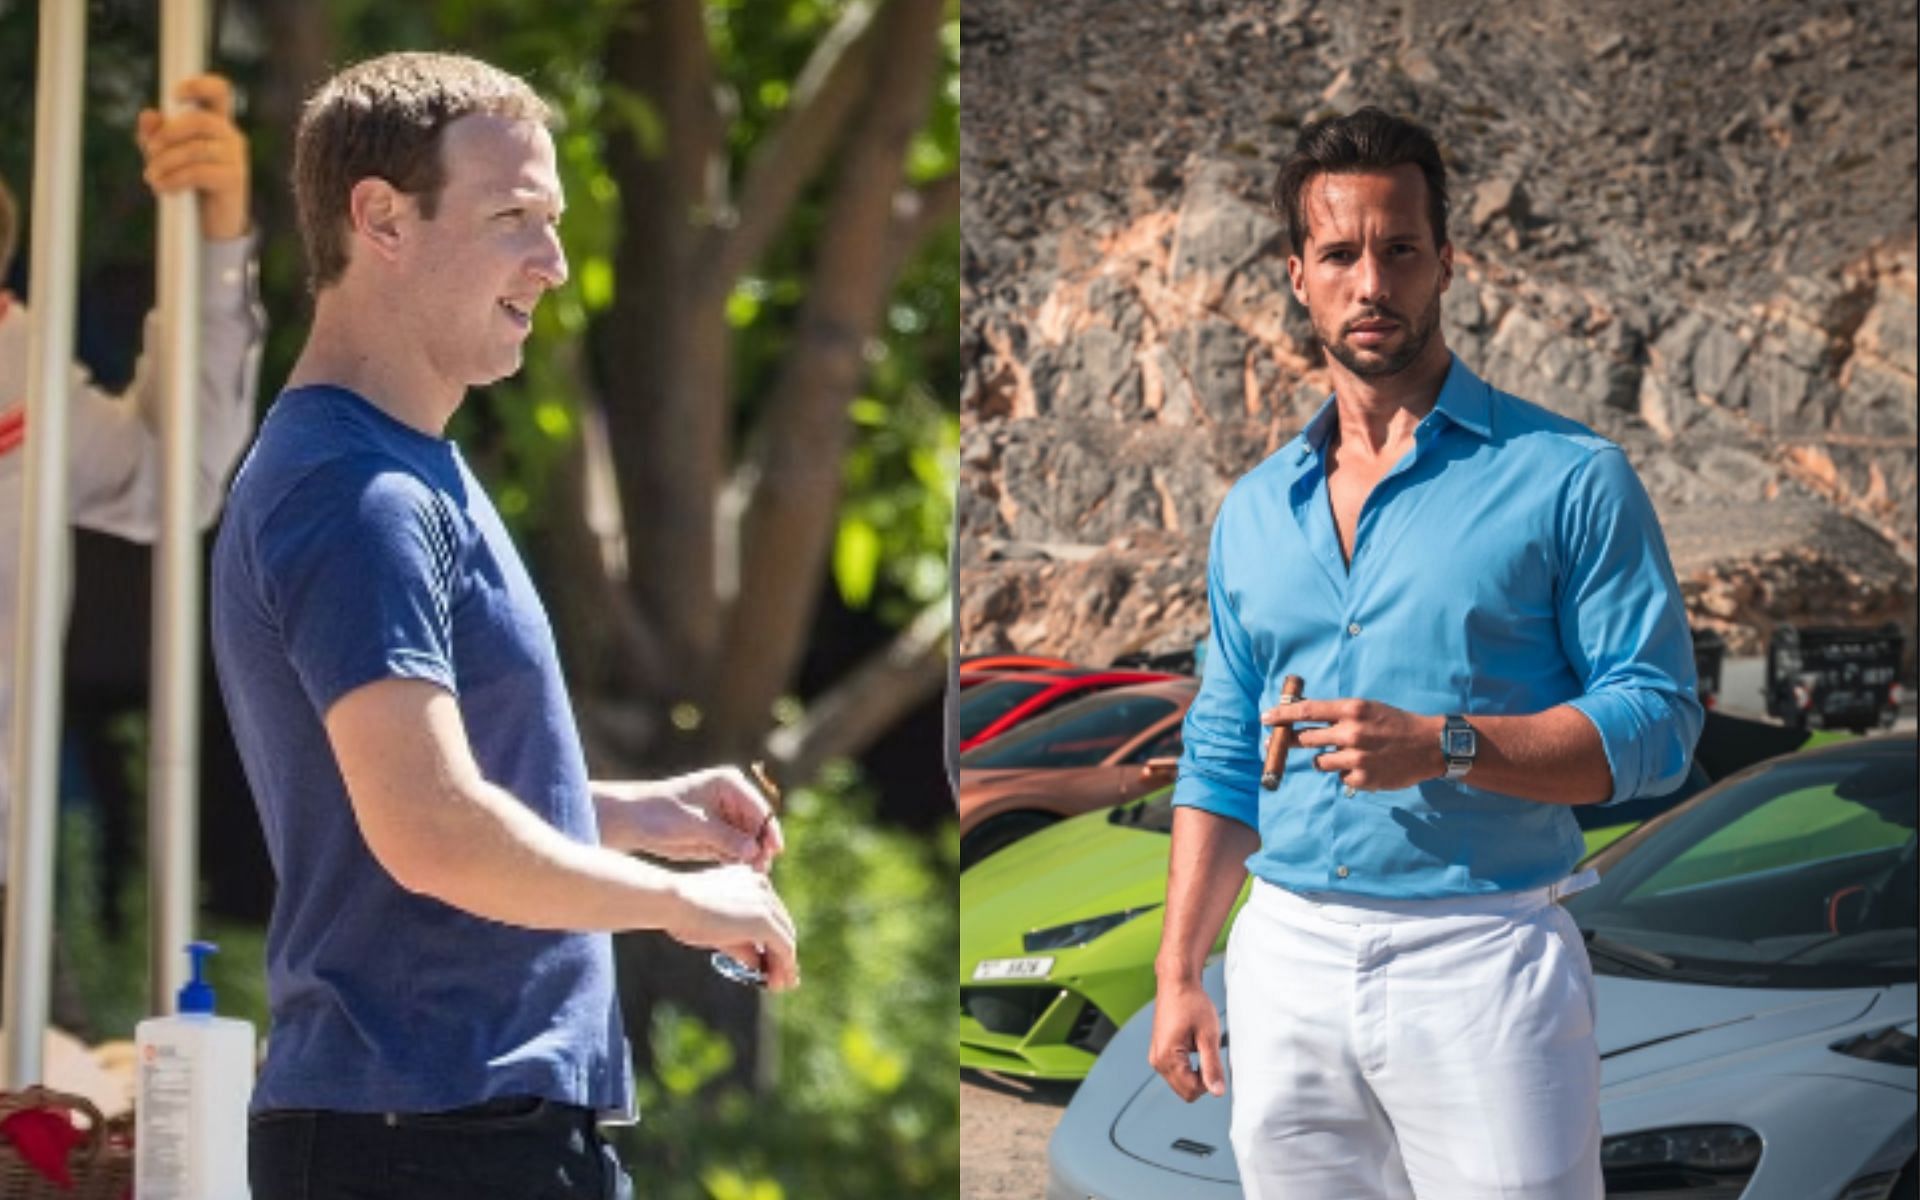 Meta CEO Mark Zuckerberg on the left and social media influencer Tristan Tate on the right [Tristan Tate image source: @TateTheTalisman on Twitter]